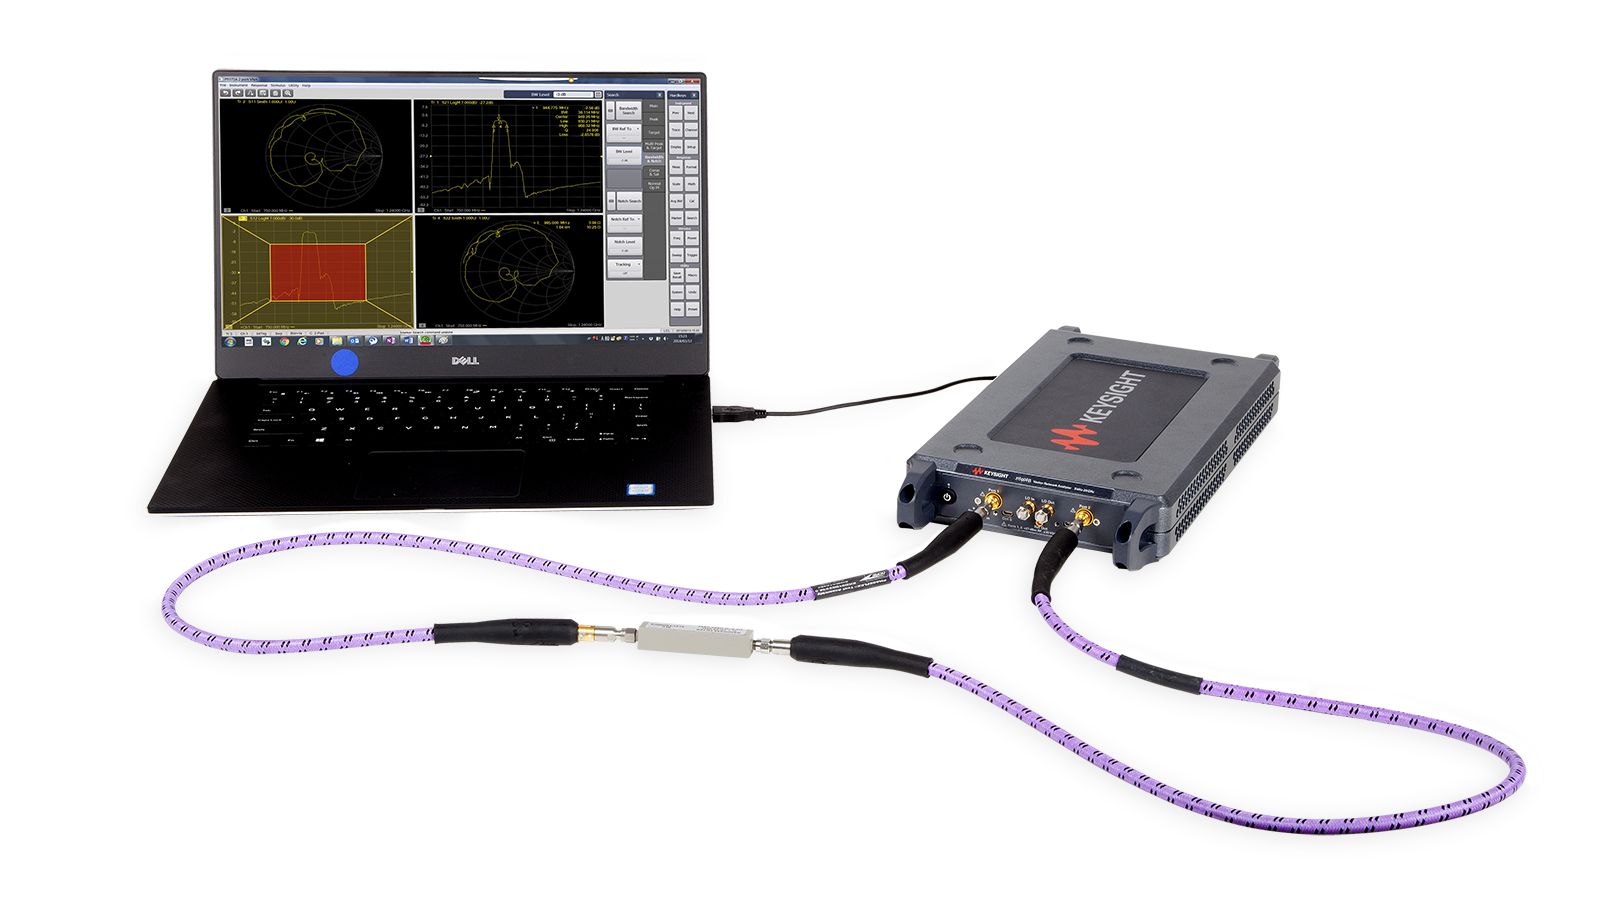 Pulsed RF measurements with a Streamline VNA